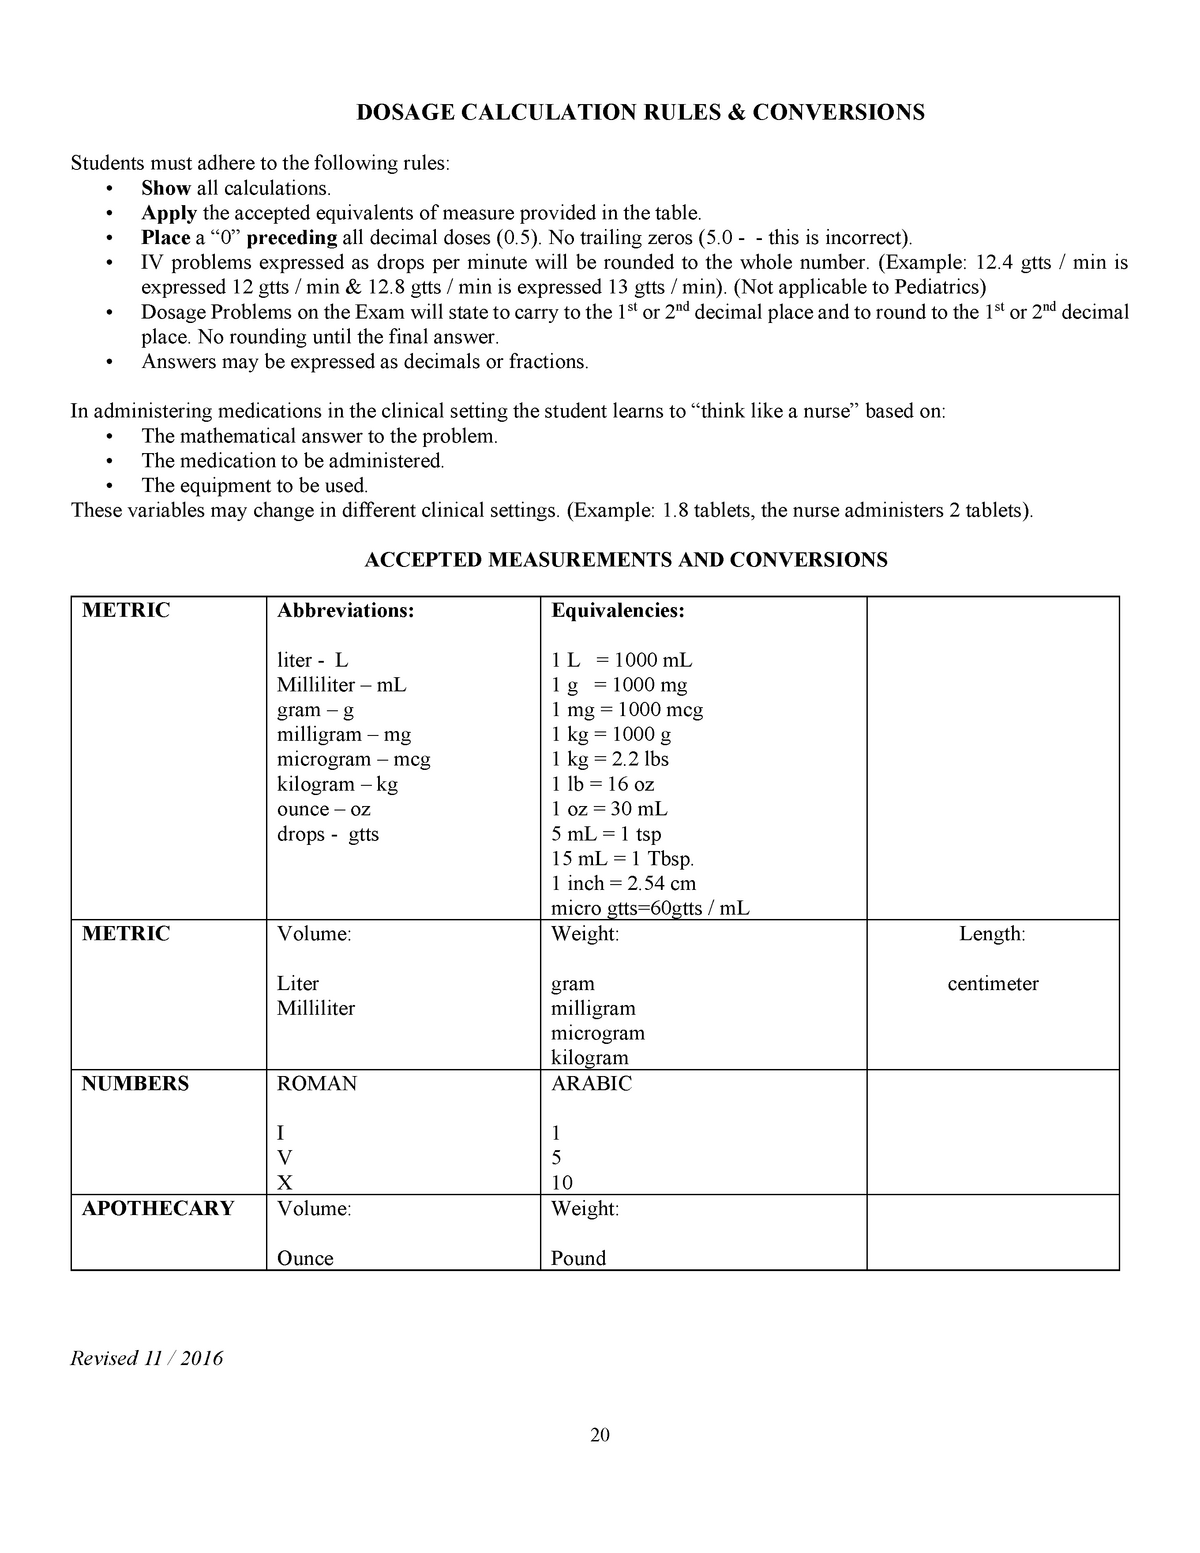 dosage-calculation-conversion-table-20-dosage-calculation-rules-conversions-students-must